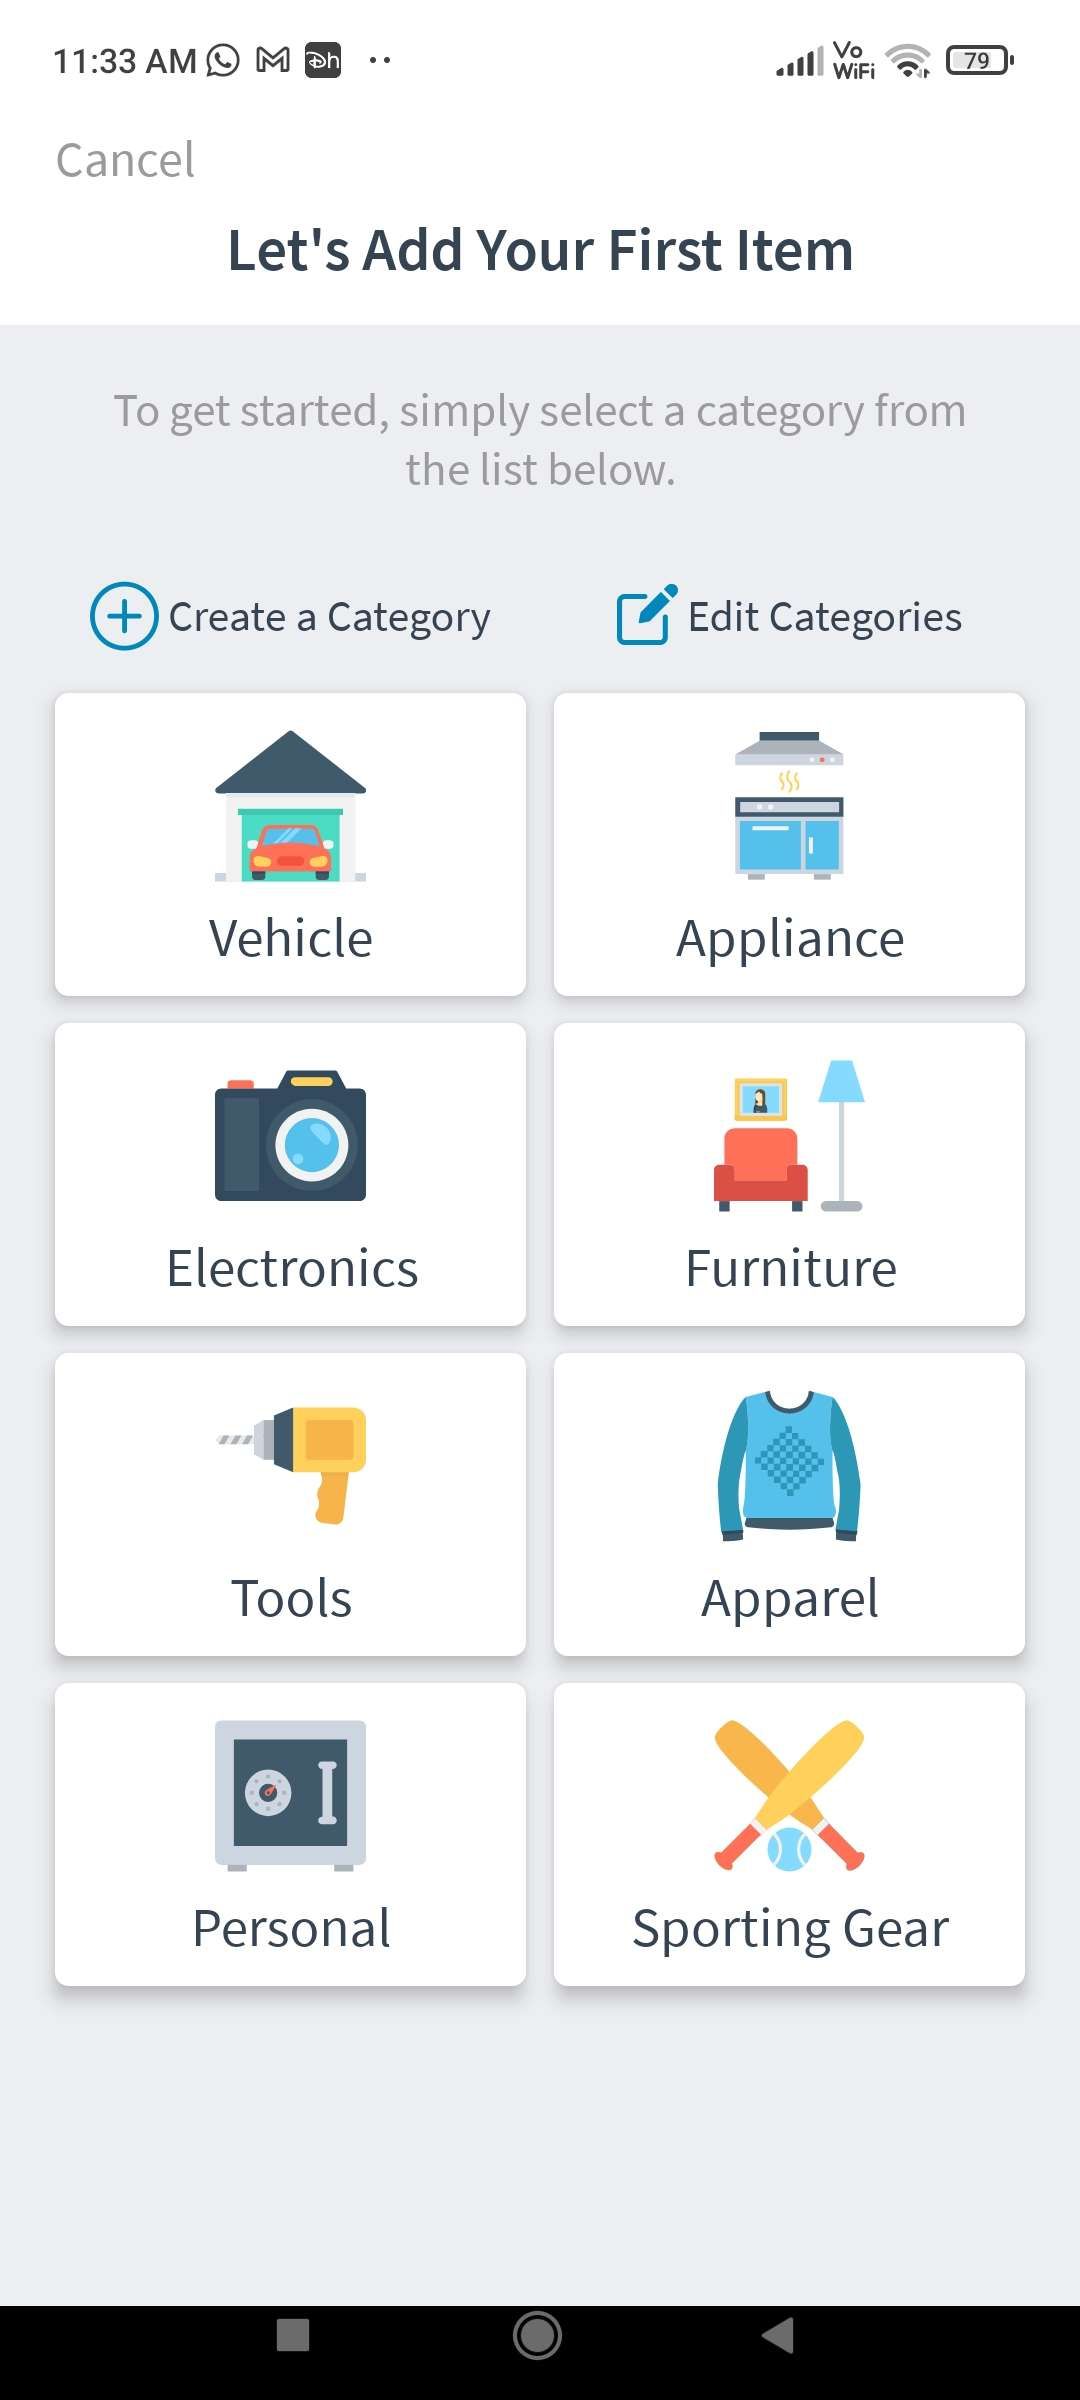 Itemopia is a simple app to create a home inventory of all your belongings so you know where every item is and what its condition is